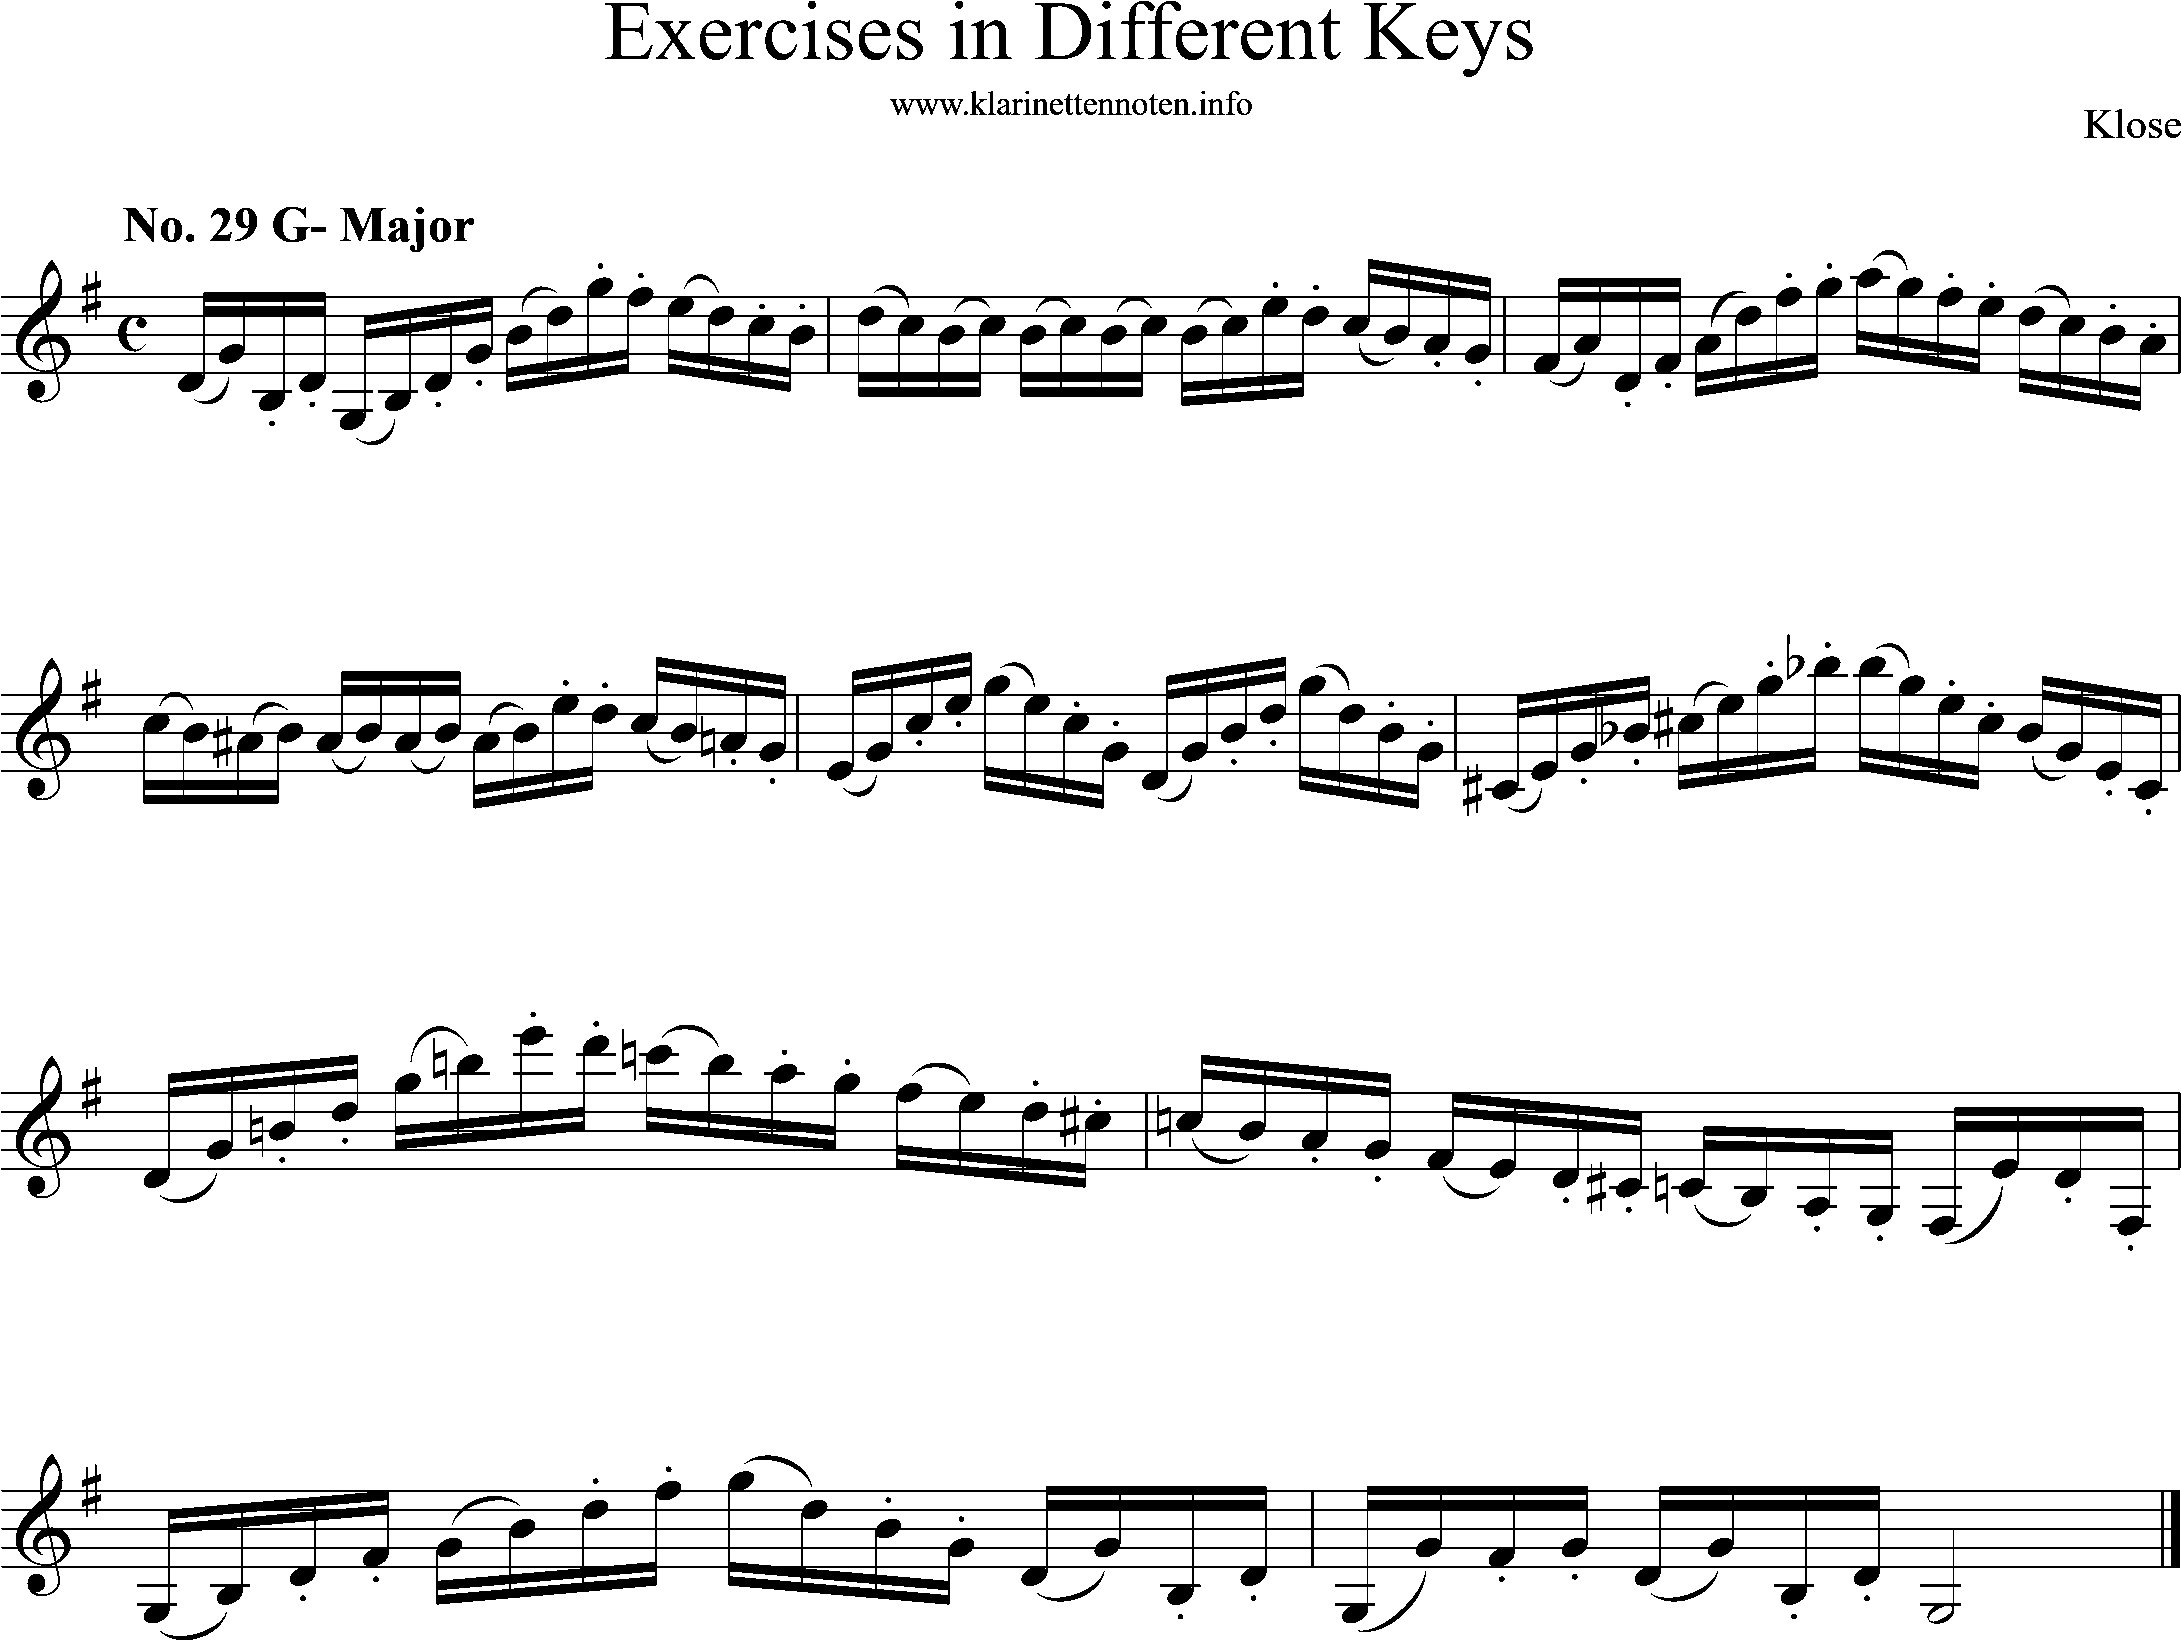 Exercises in Differewnt Keys, klose, No-29, g-major